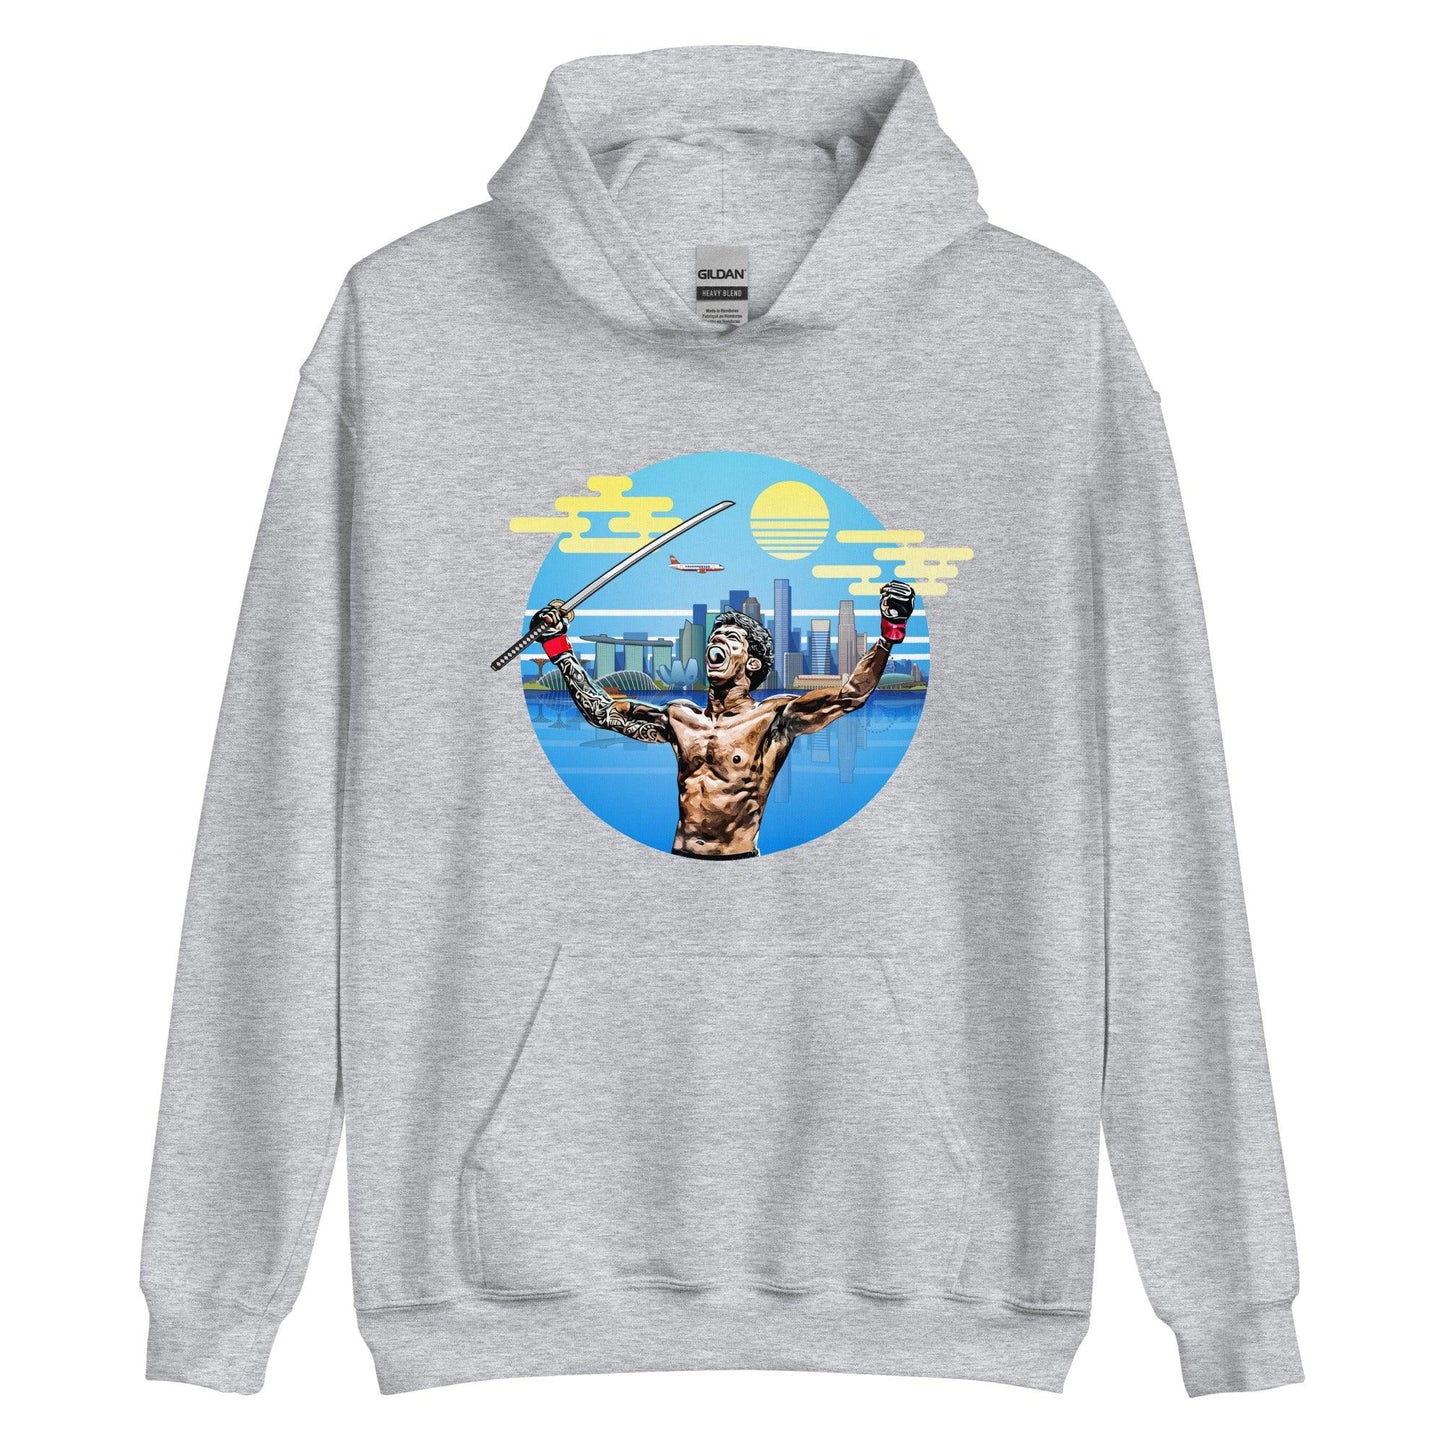 Adriano Moraes "Taking Over" Hoodie - Fan Arch